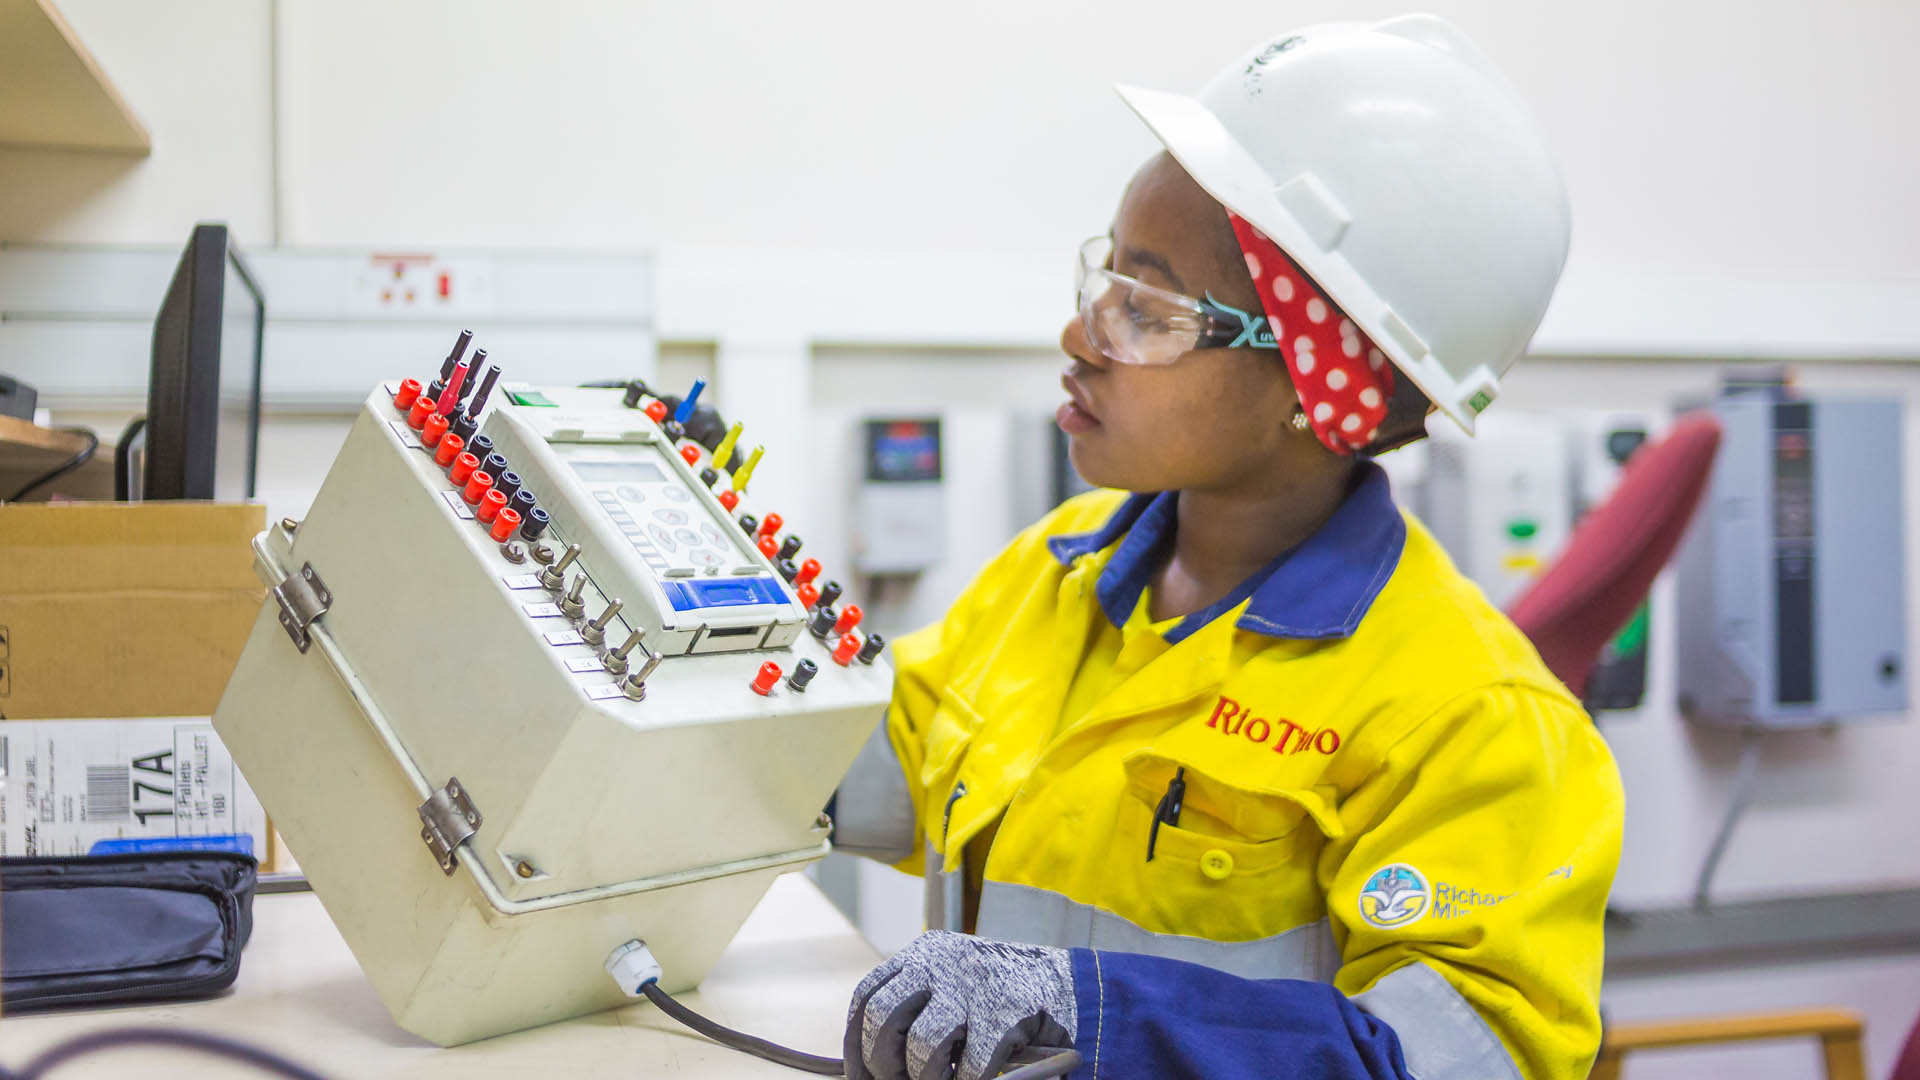 Technical work at Richards Bay Minerals